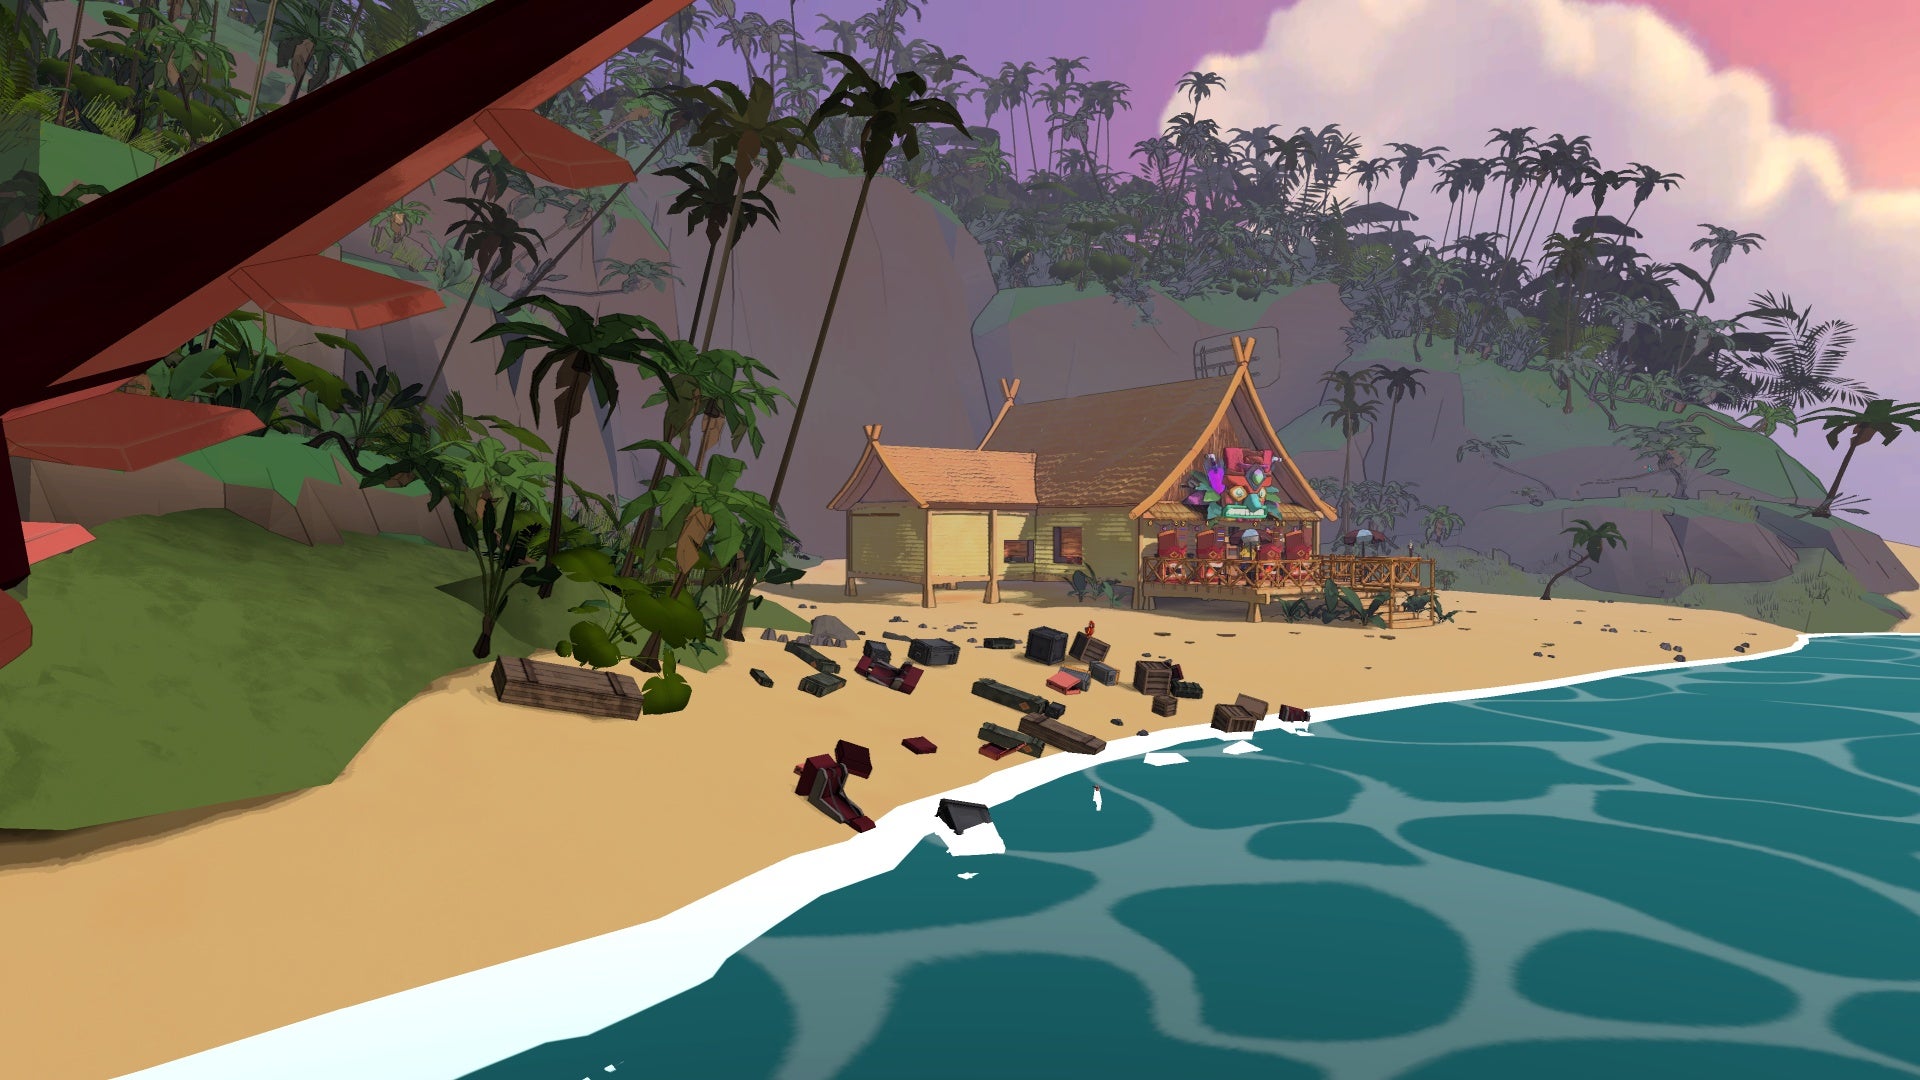 A screenshot from Escape Academy's Escape From Anti-Escape Island DLC, out November 10th, 2022, showing a hut on a beach and the sea